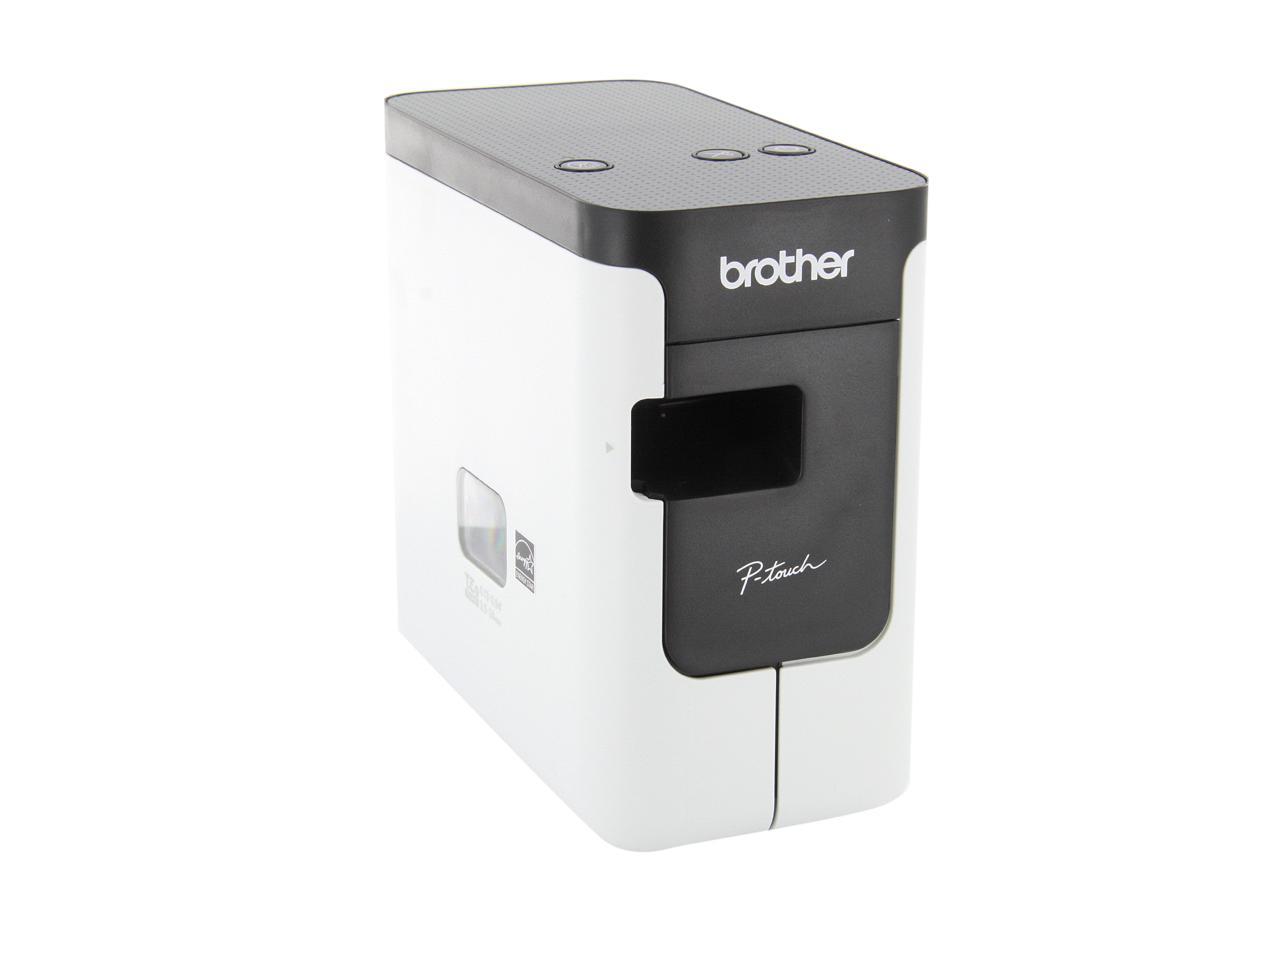 Brother® P-touch® PT-P700 PC Connectable Label Maker for PC and Mac